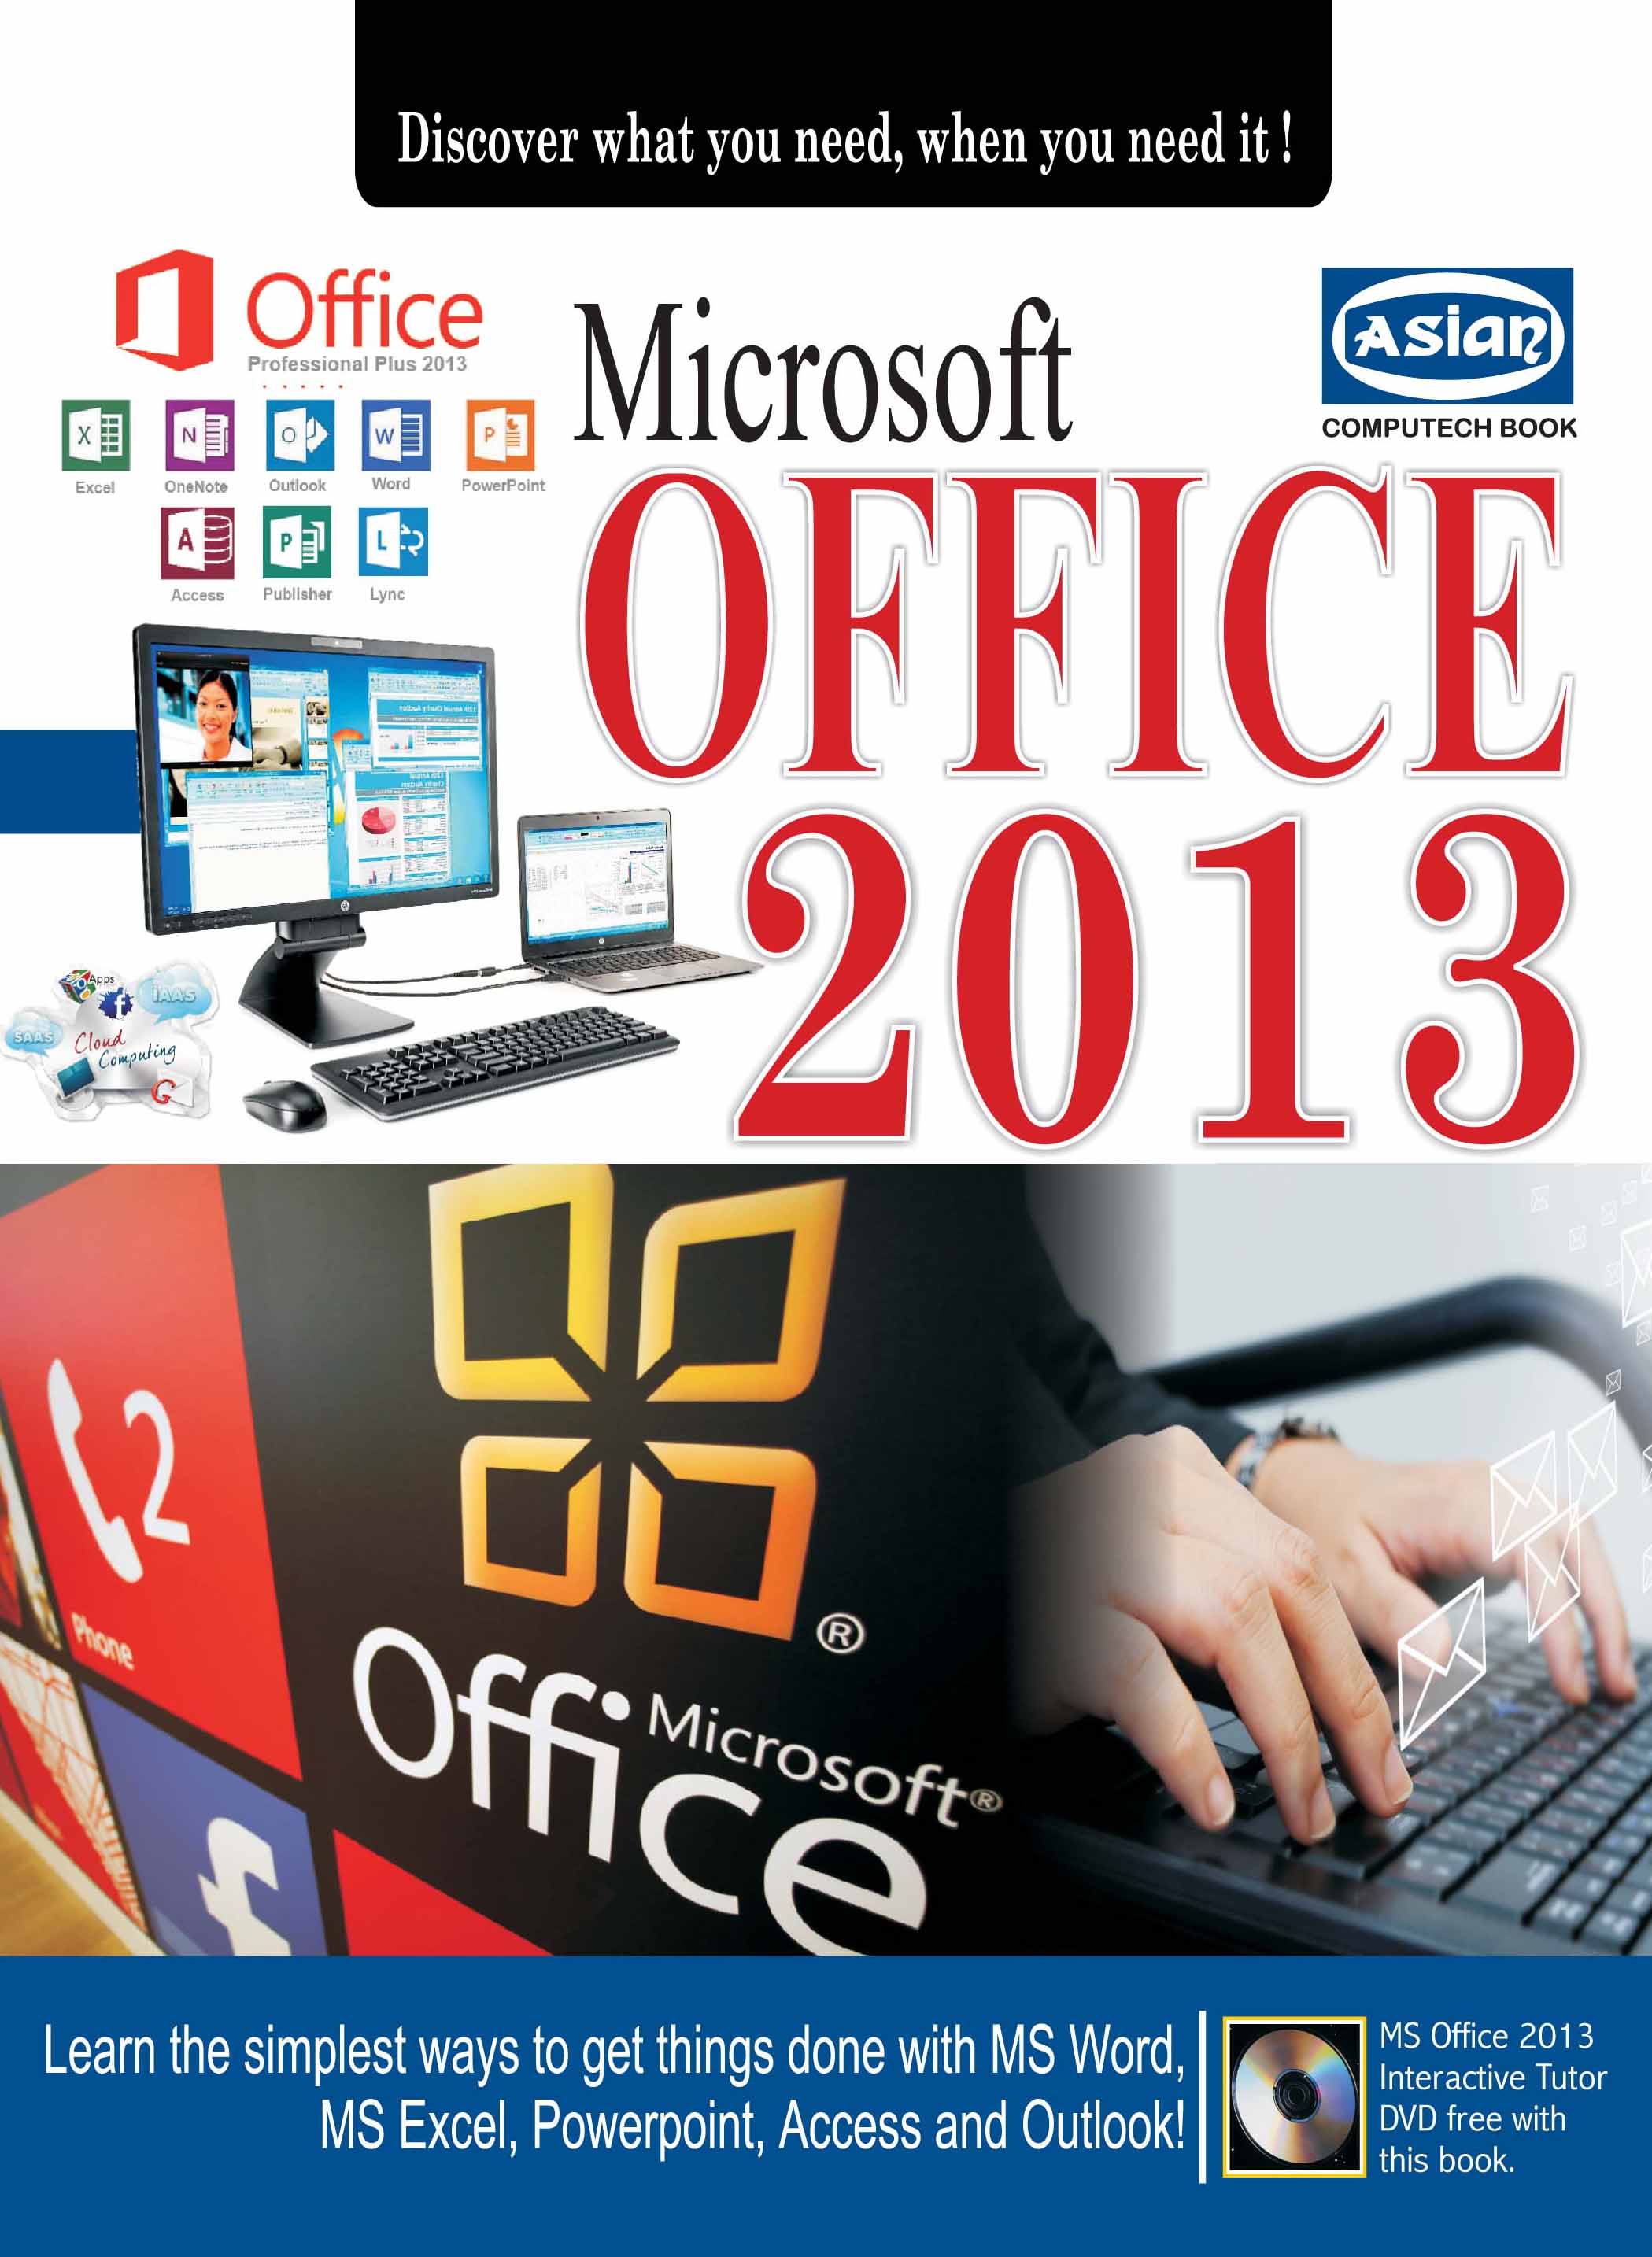 deals for microsoft office